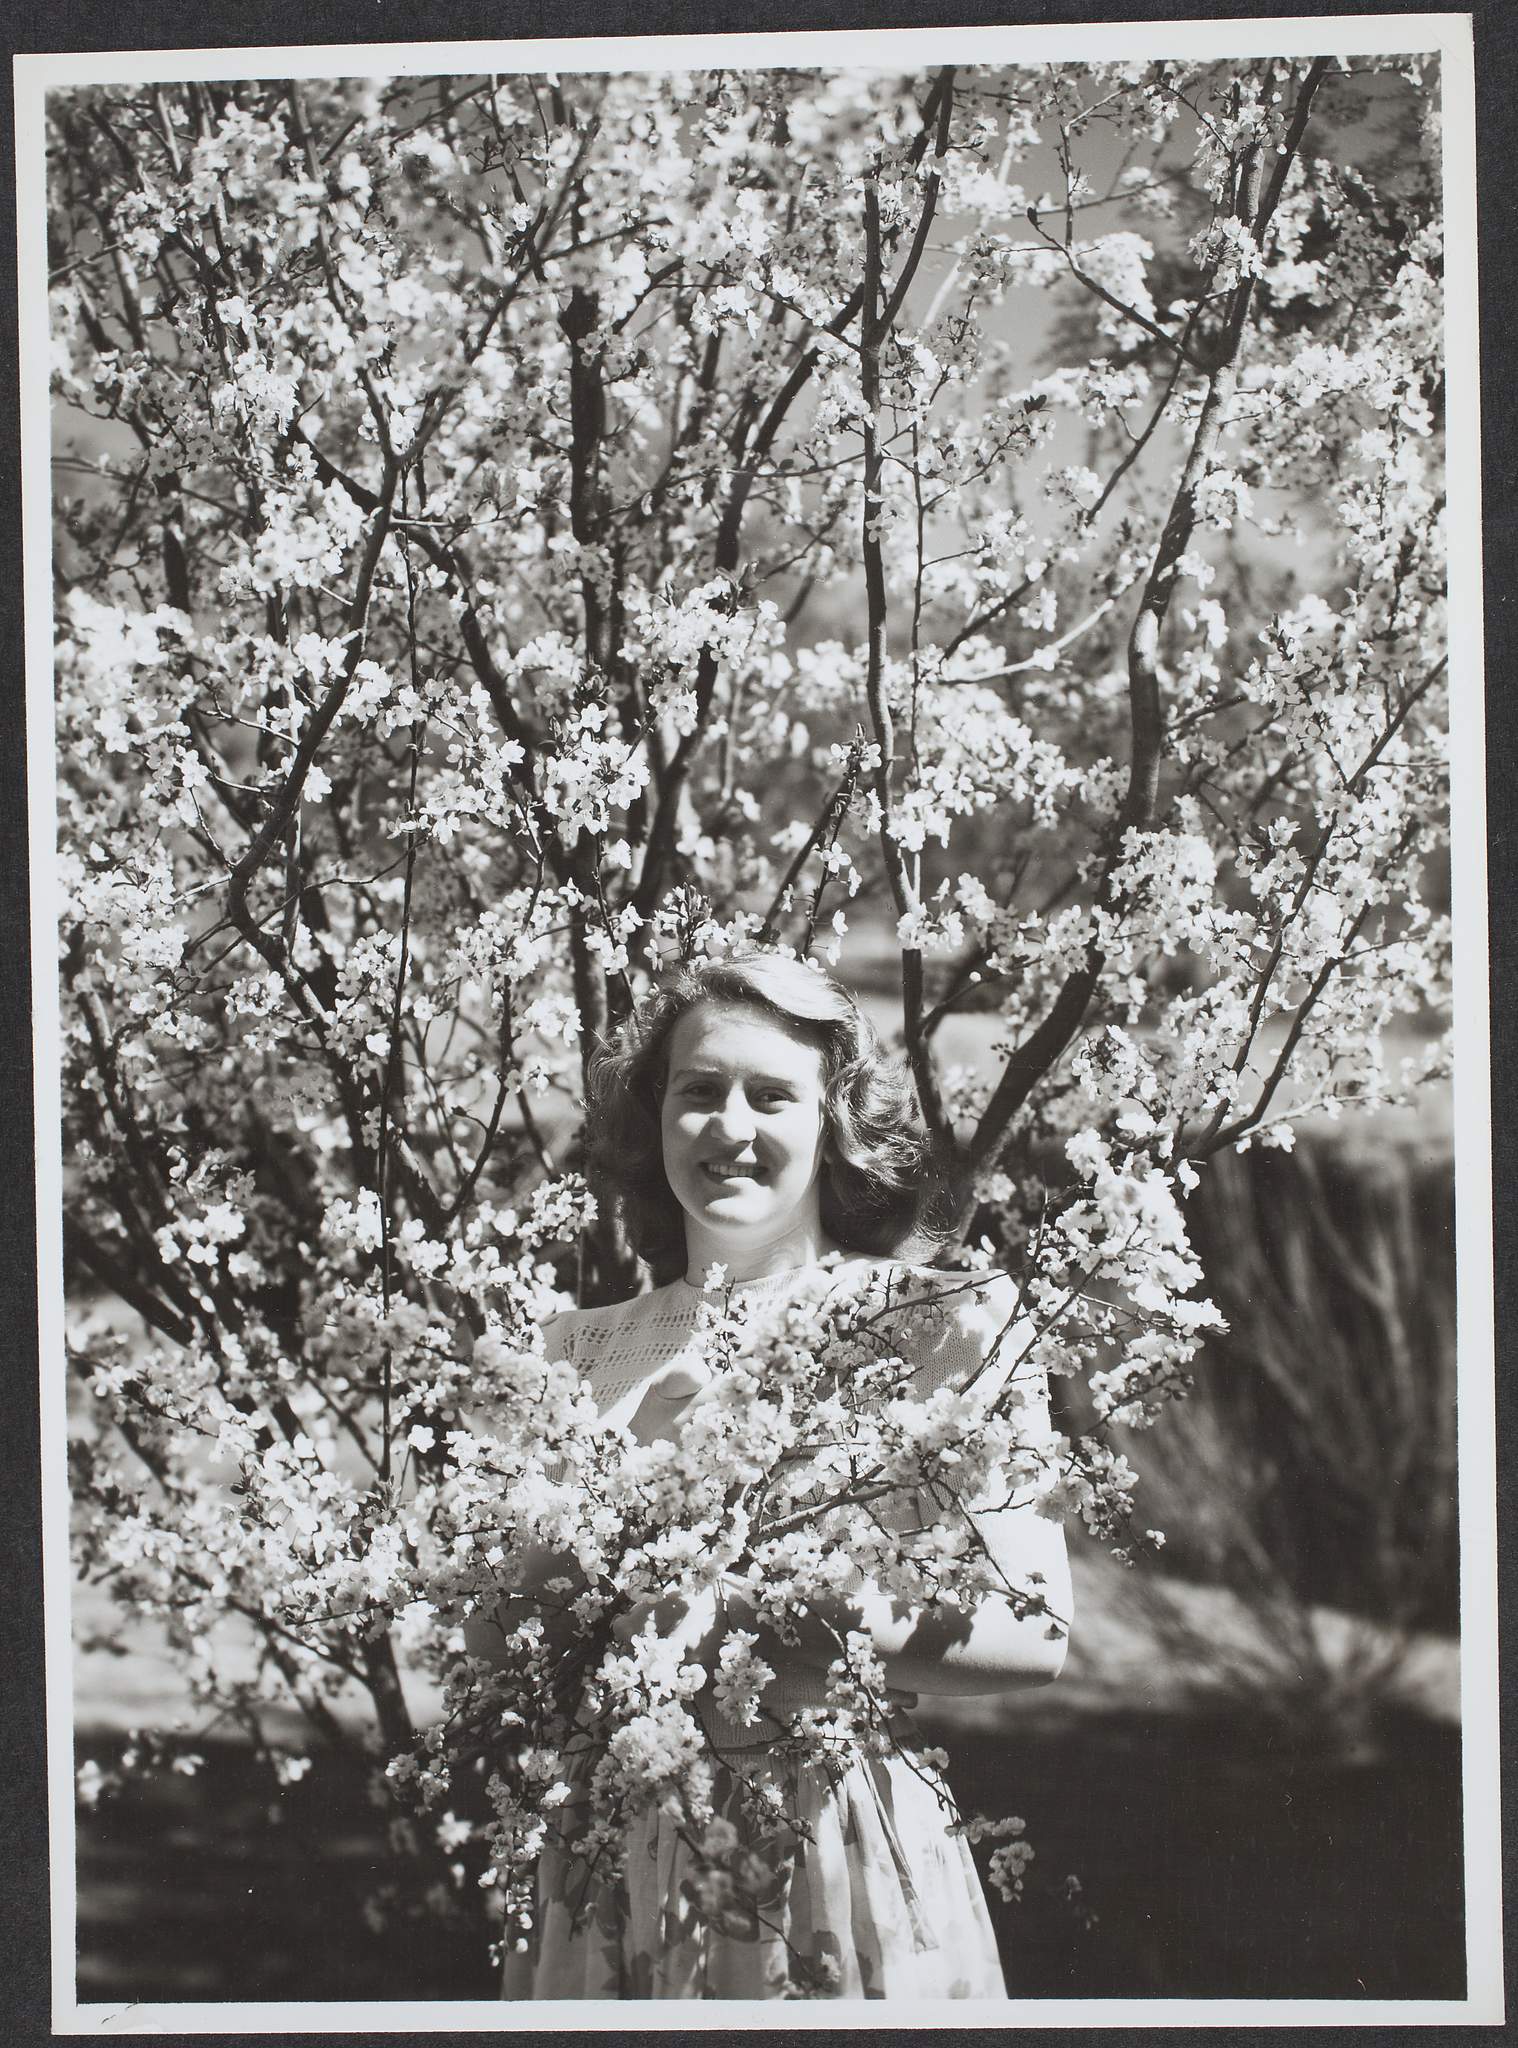 “Woman with blossoms, Canberra, ACT”, 8 August 1951, Commercial Travellers’ Association Administrative Records and Publications, 1979.0162.02644.